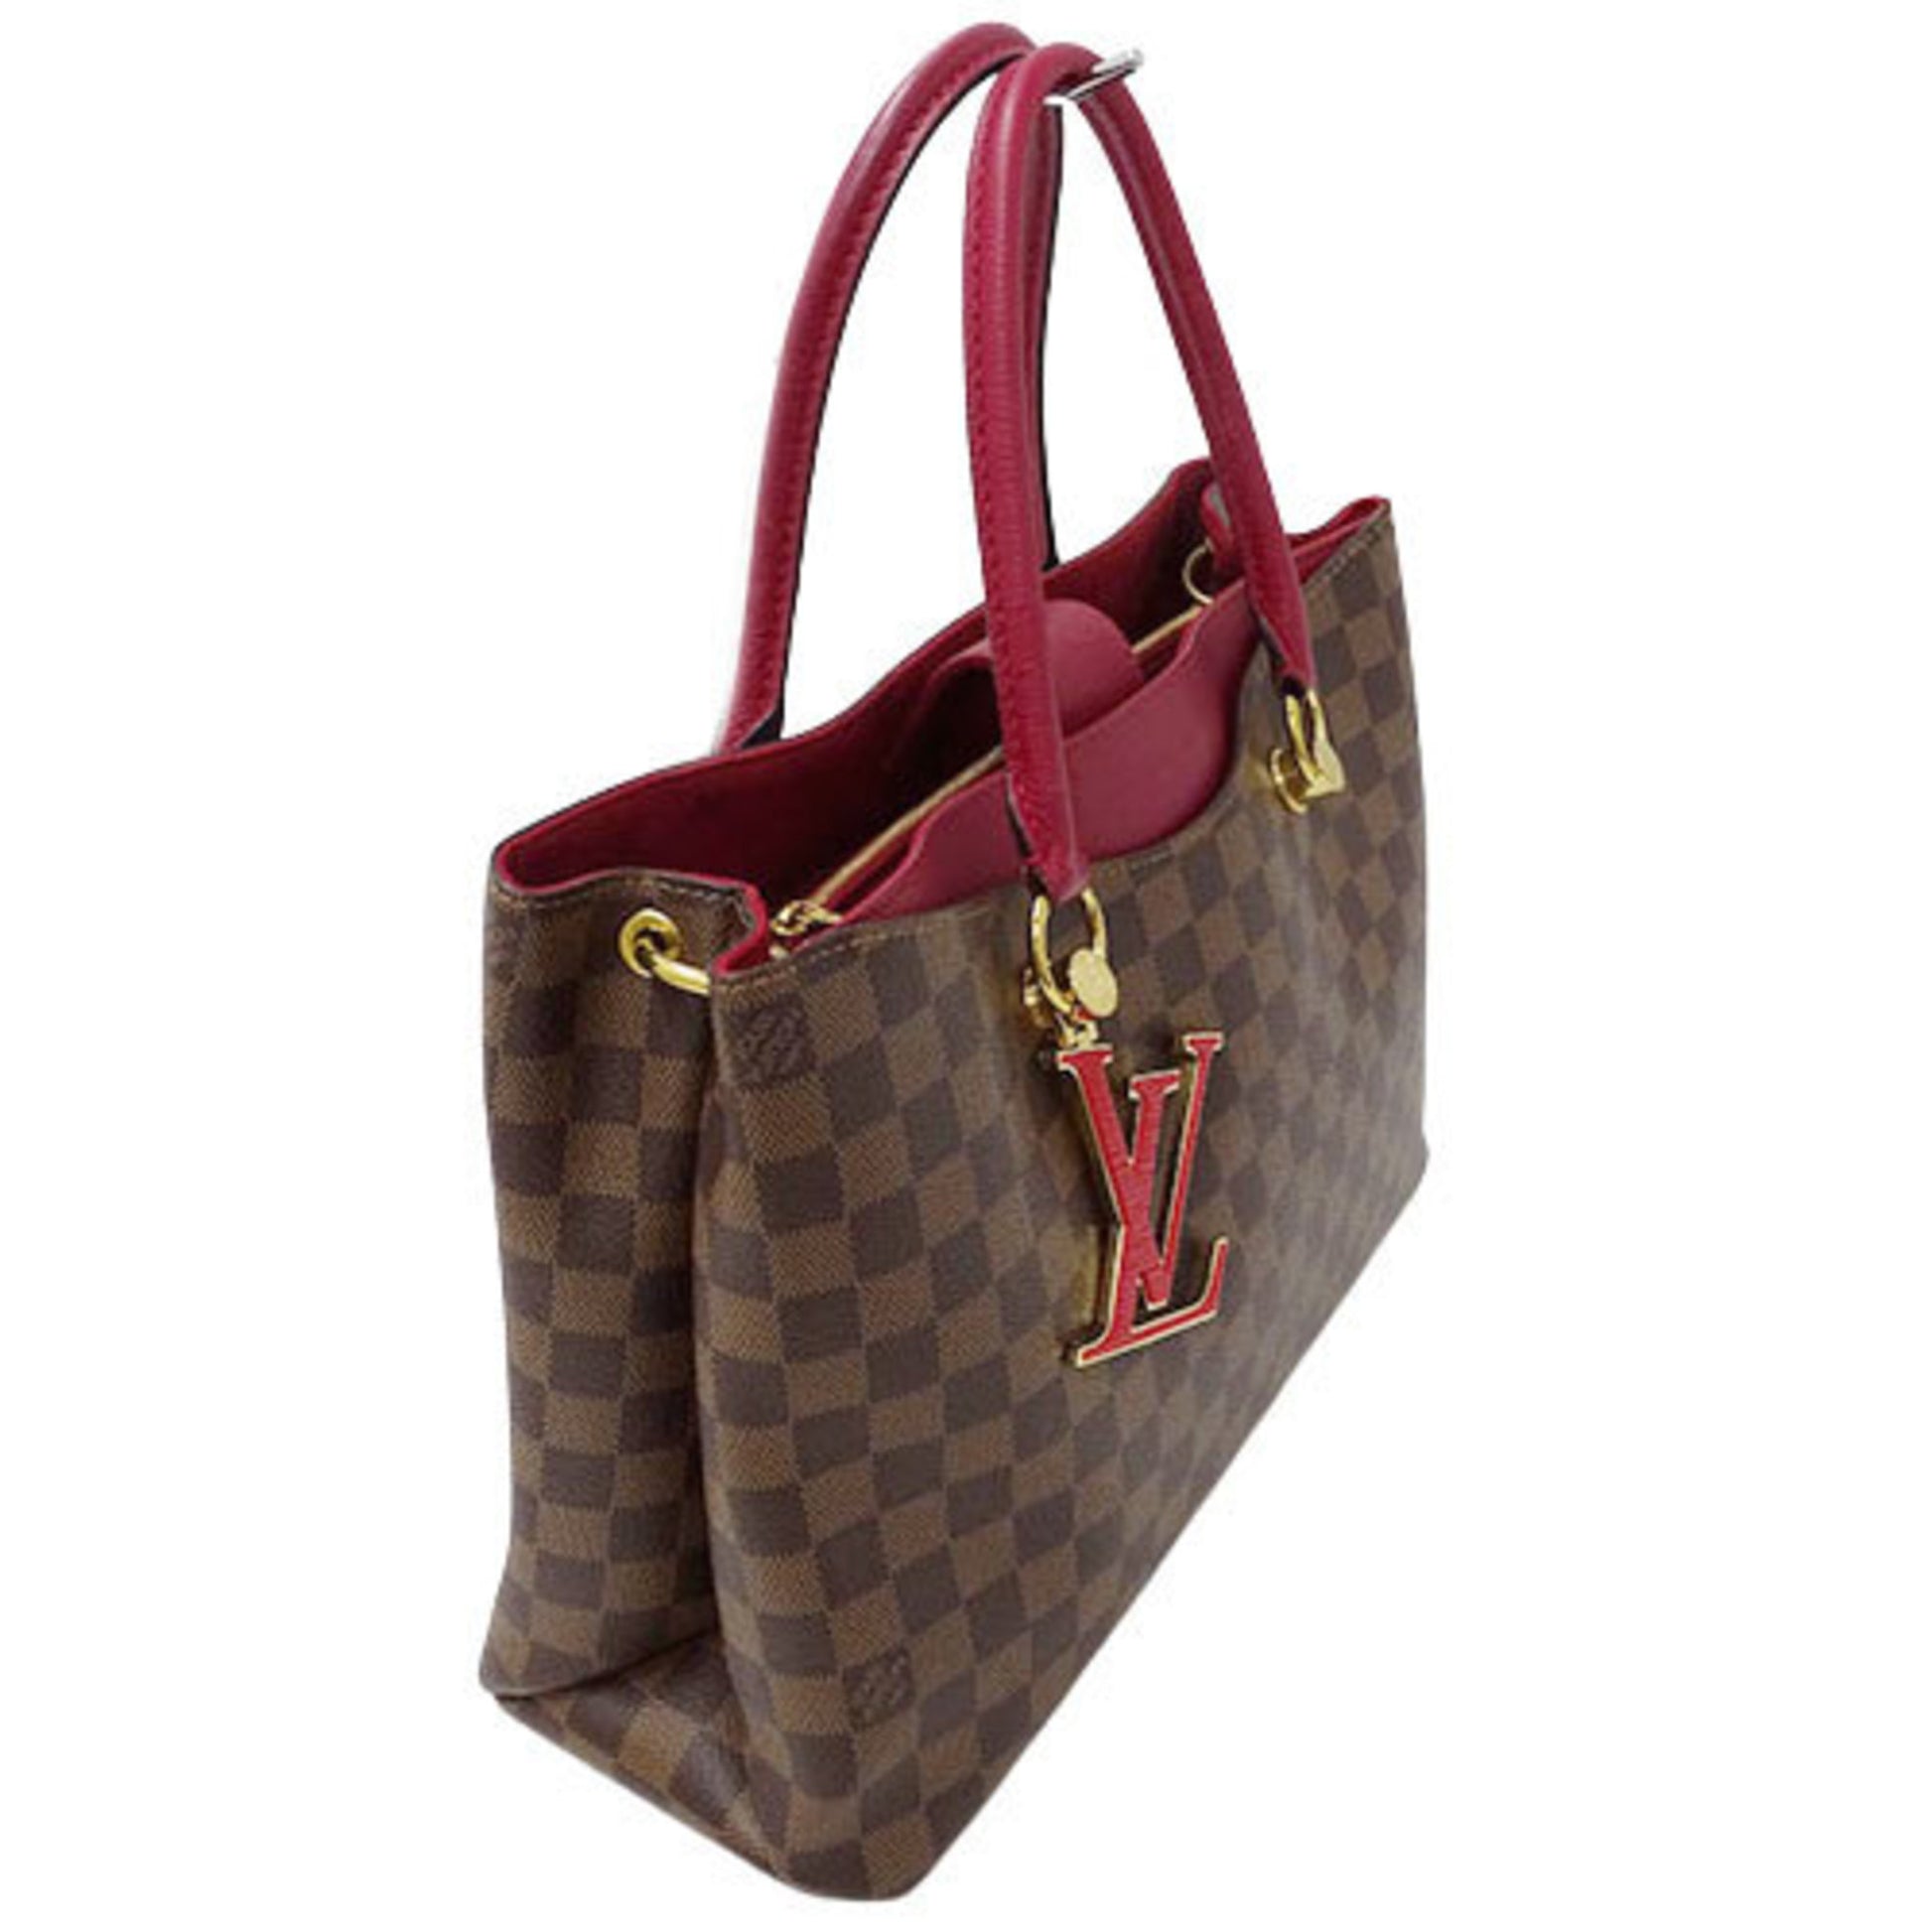  Louis Vuitton N40052 LV Riverside Damier 2-Way Shoulder Bag,  Handbag, Damier Canvas, Women's, Used, Brown x Red. Color indicated :  Rydovan : Clothing, Shoes & Jewelry